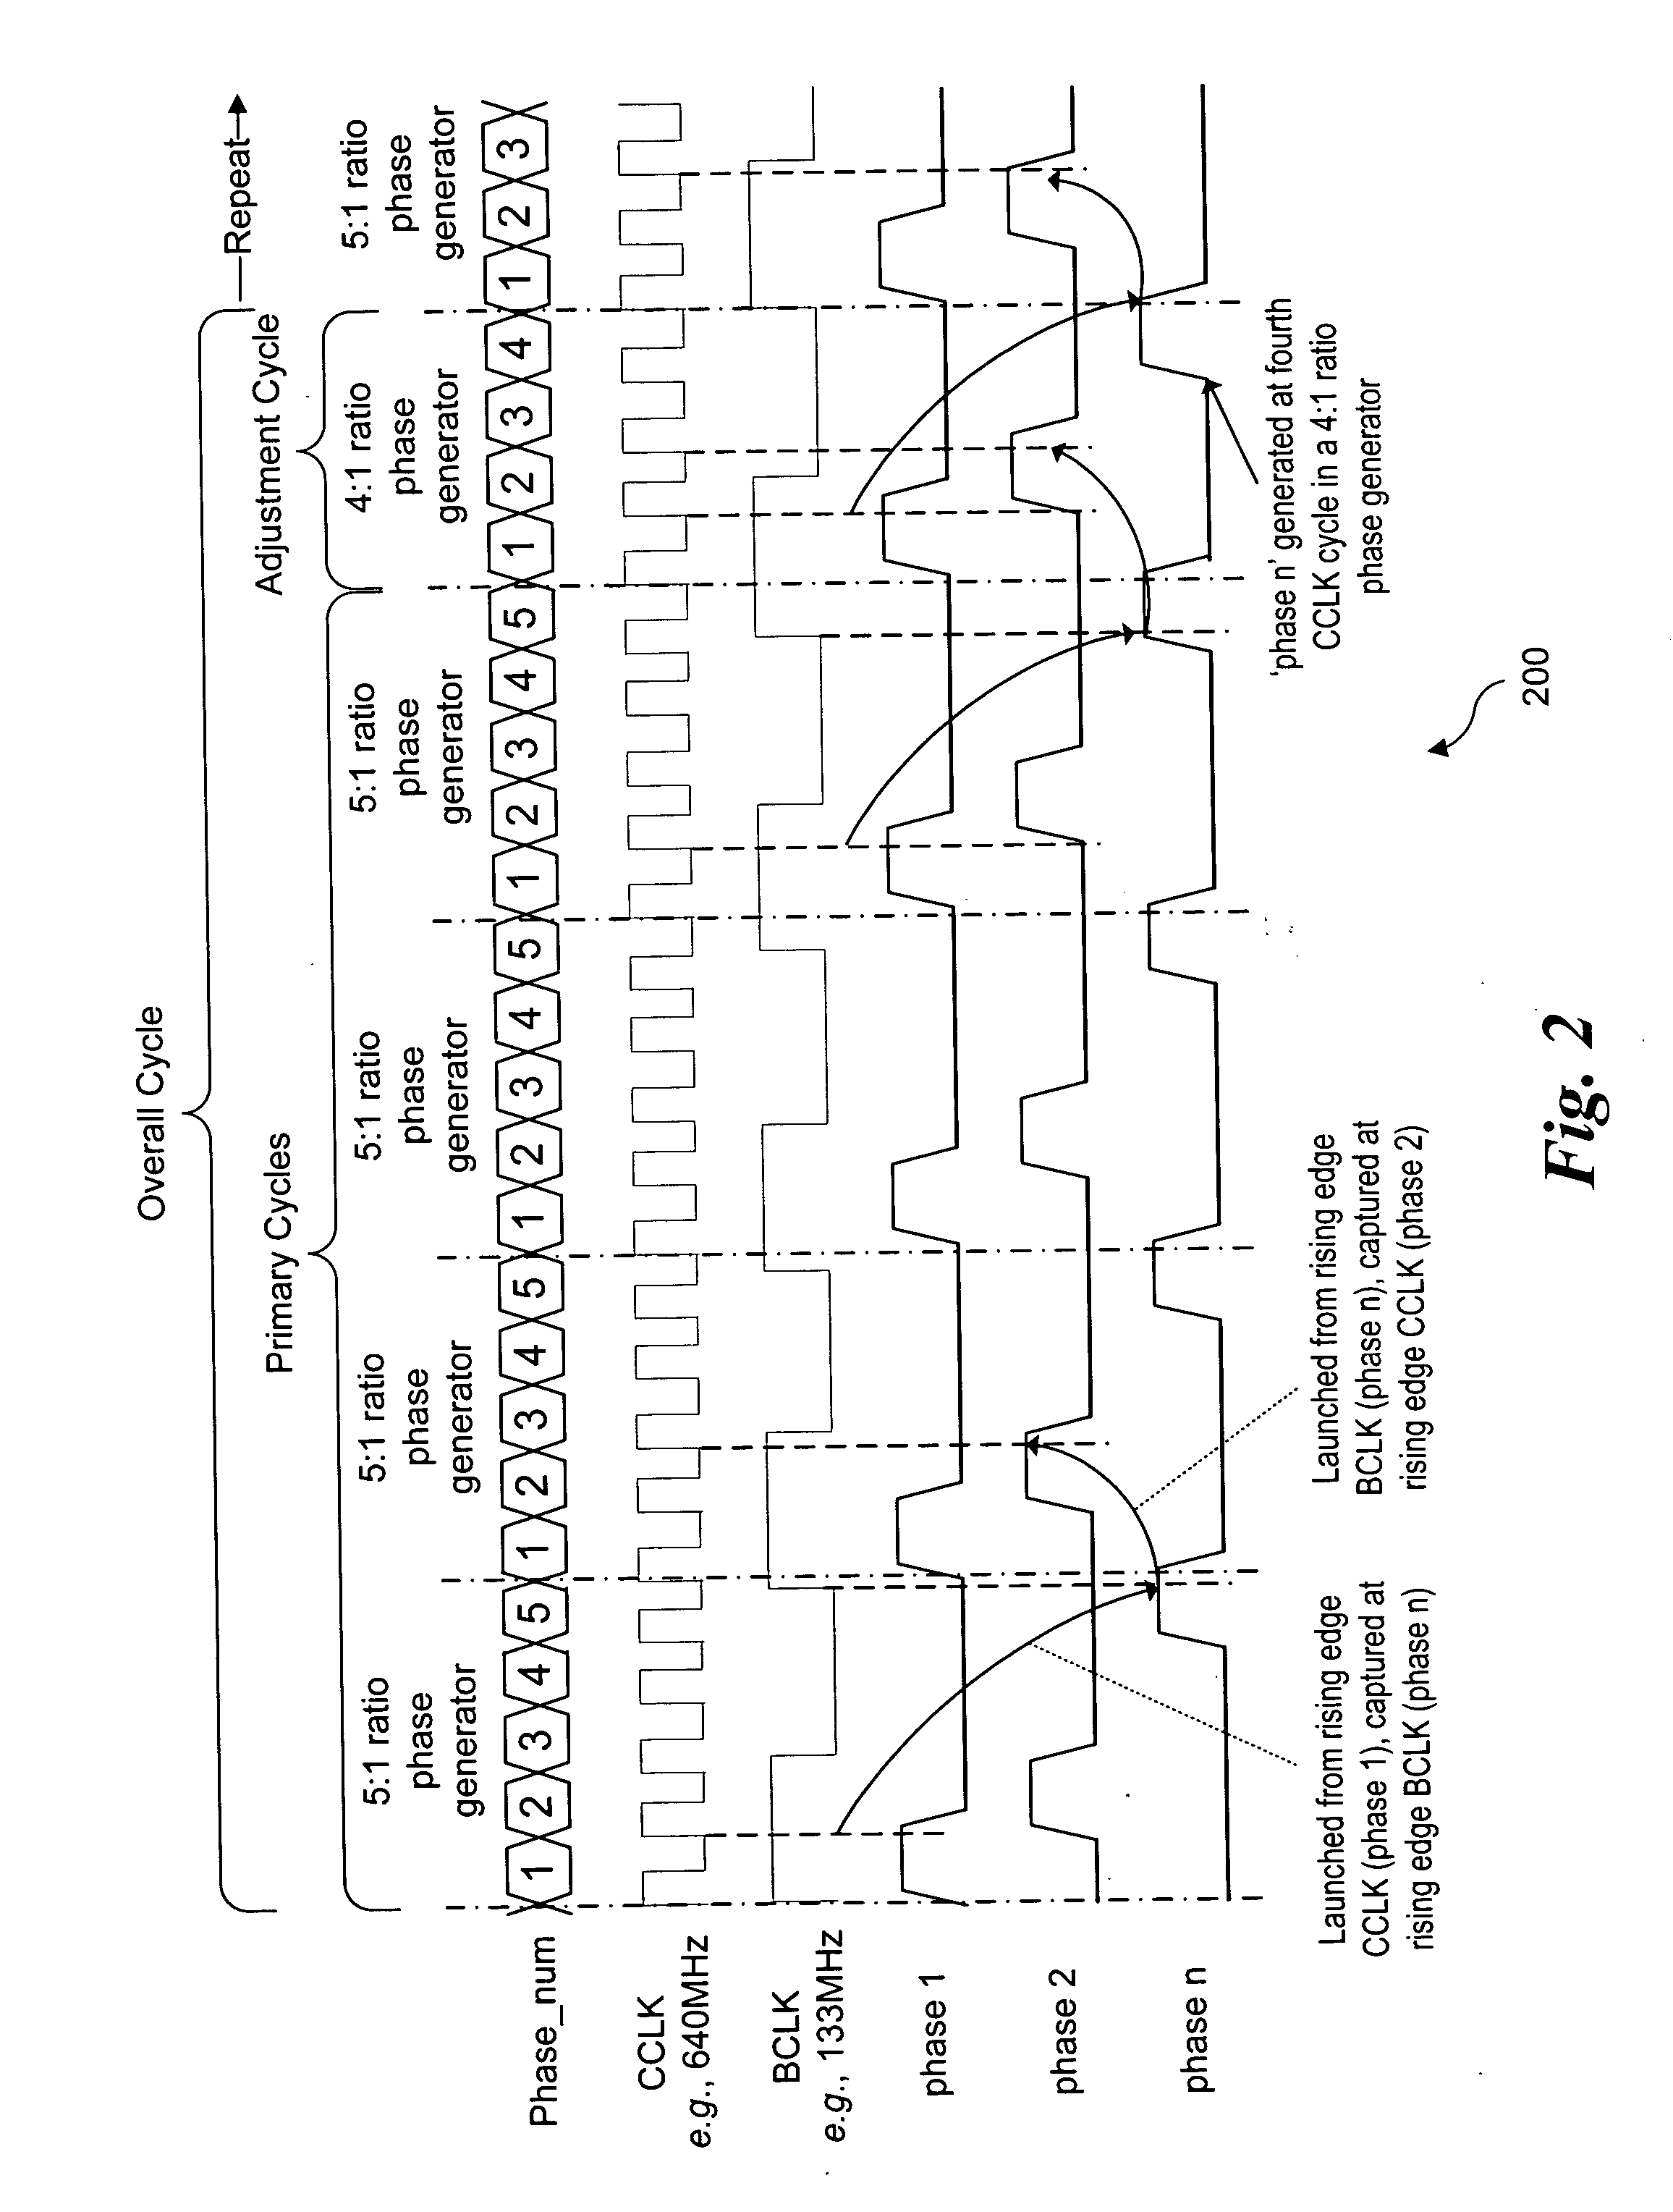 Programmable phase generator for cross-clock communication where the clock frequency ratio is a rational number